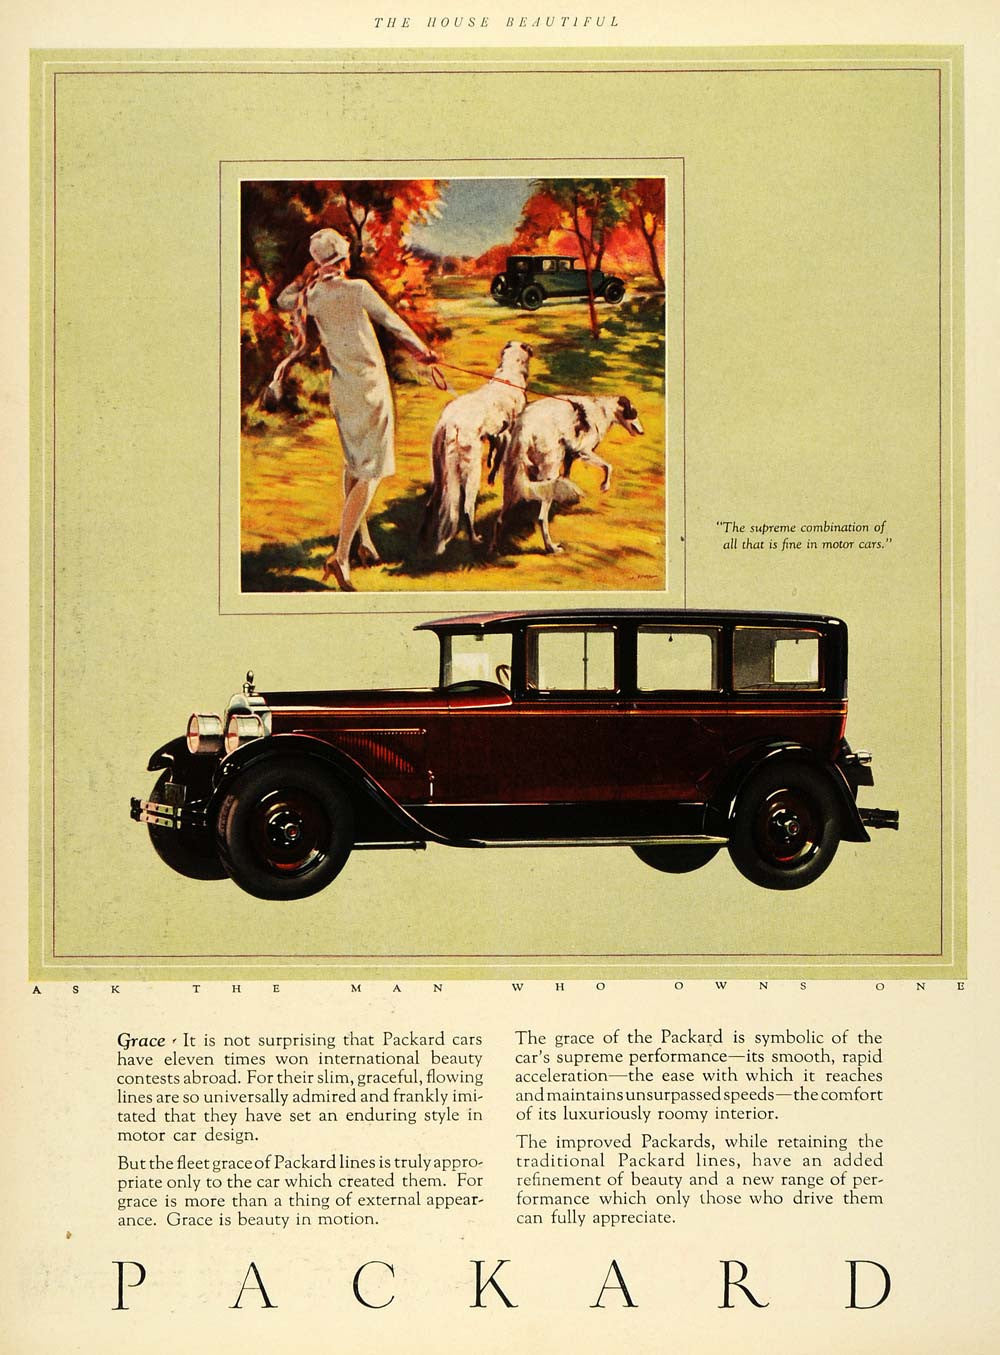 1926 Ad Packard Motor Car Luxury Automobile Borzoi Dogs Russian Wolfhound HB2 - Period Paper
